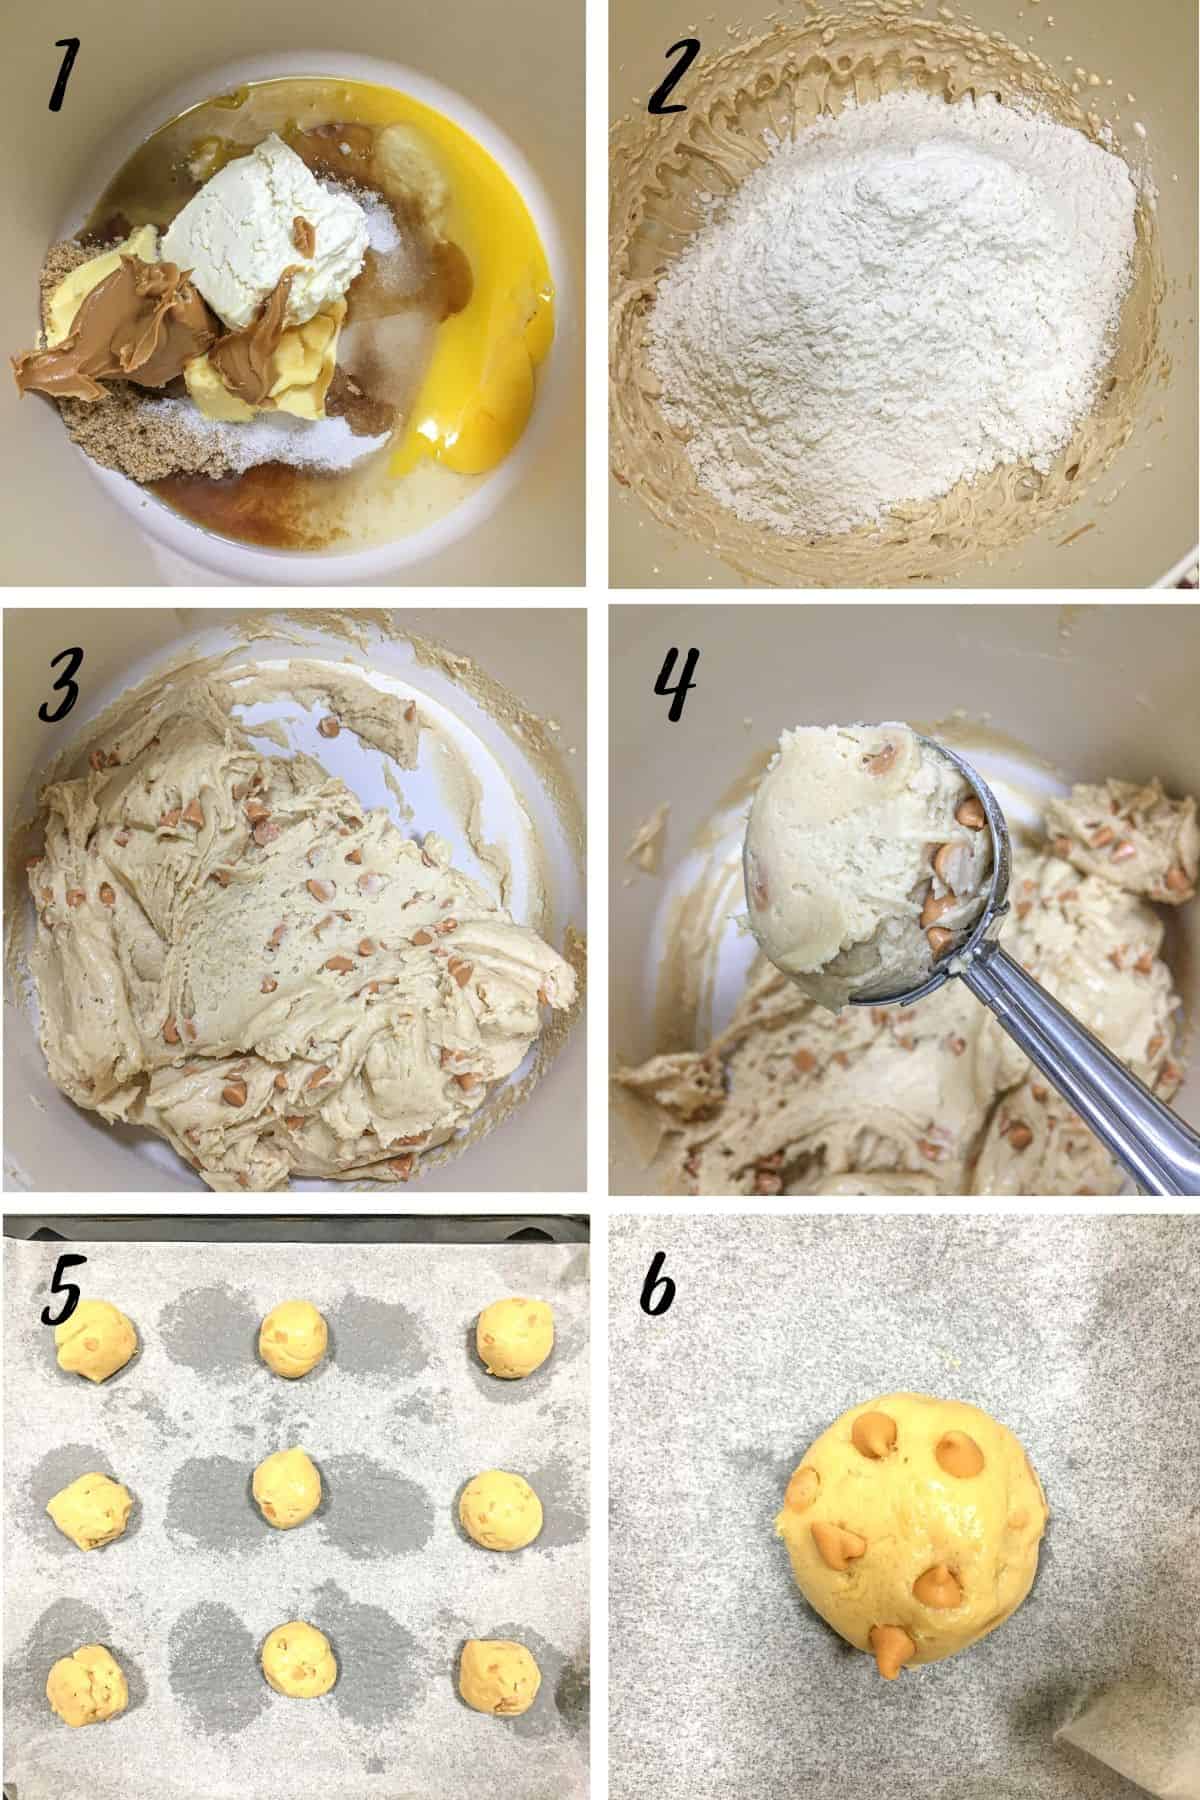 A poster of 6 images showing how to make peanut butter cream cheese cookies